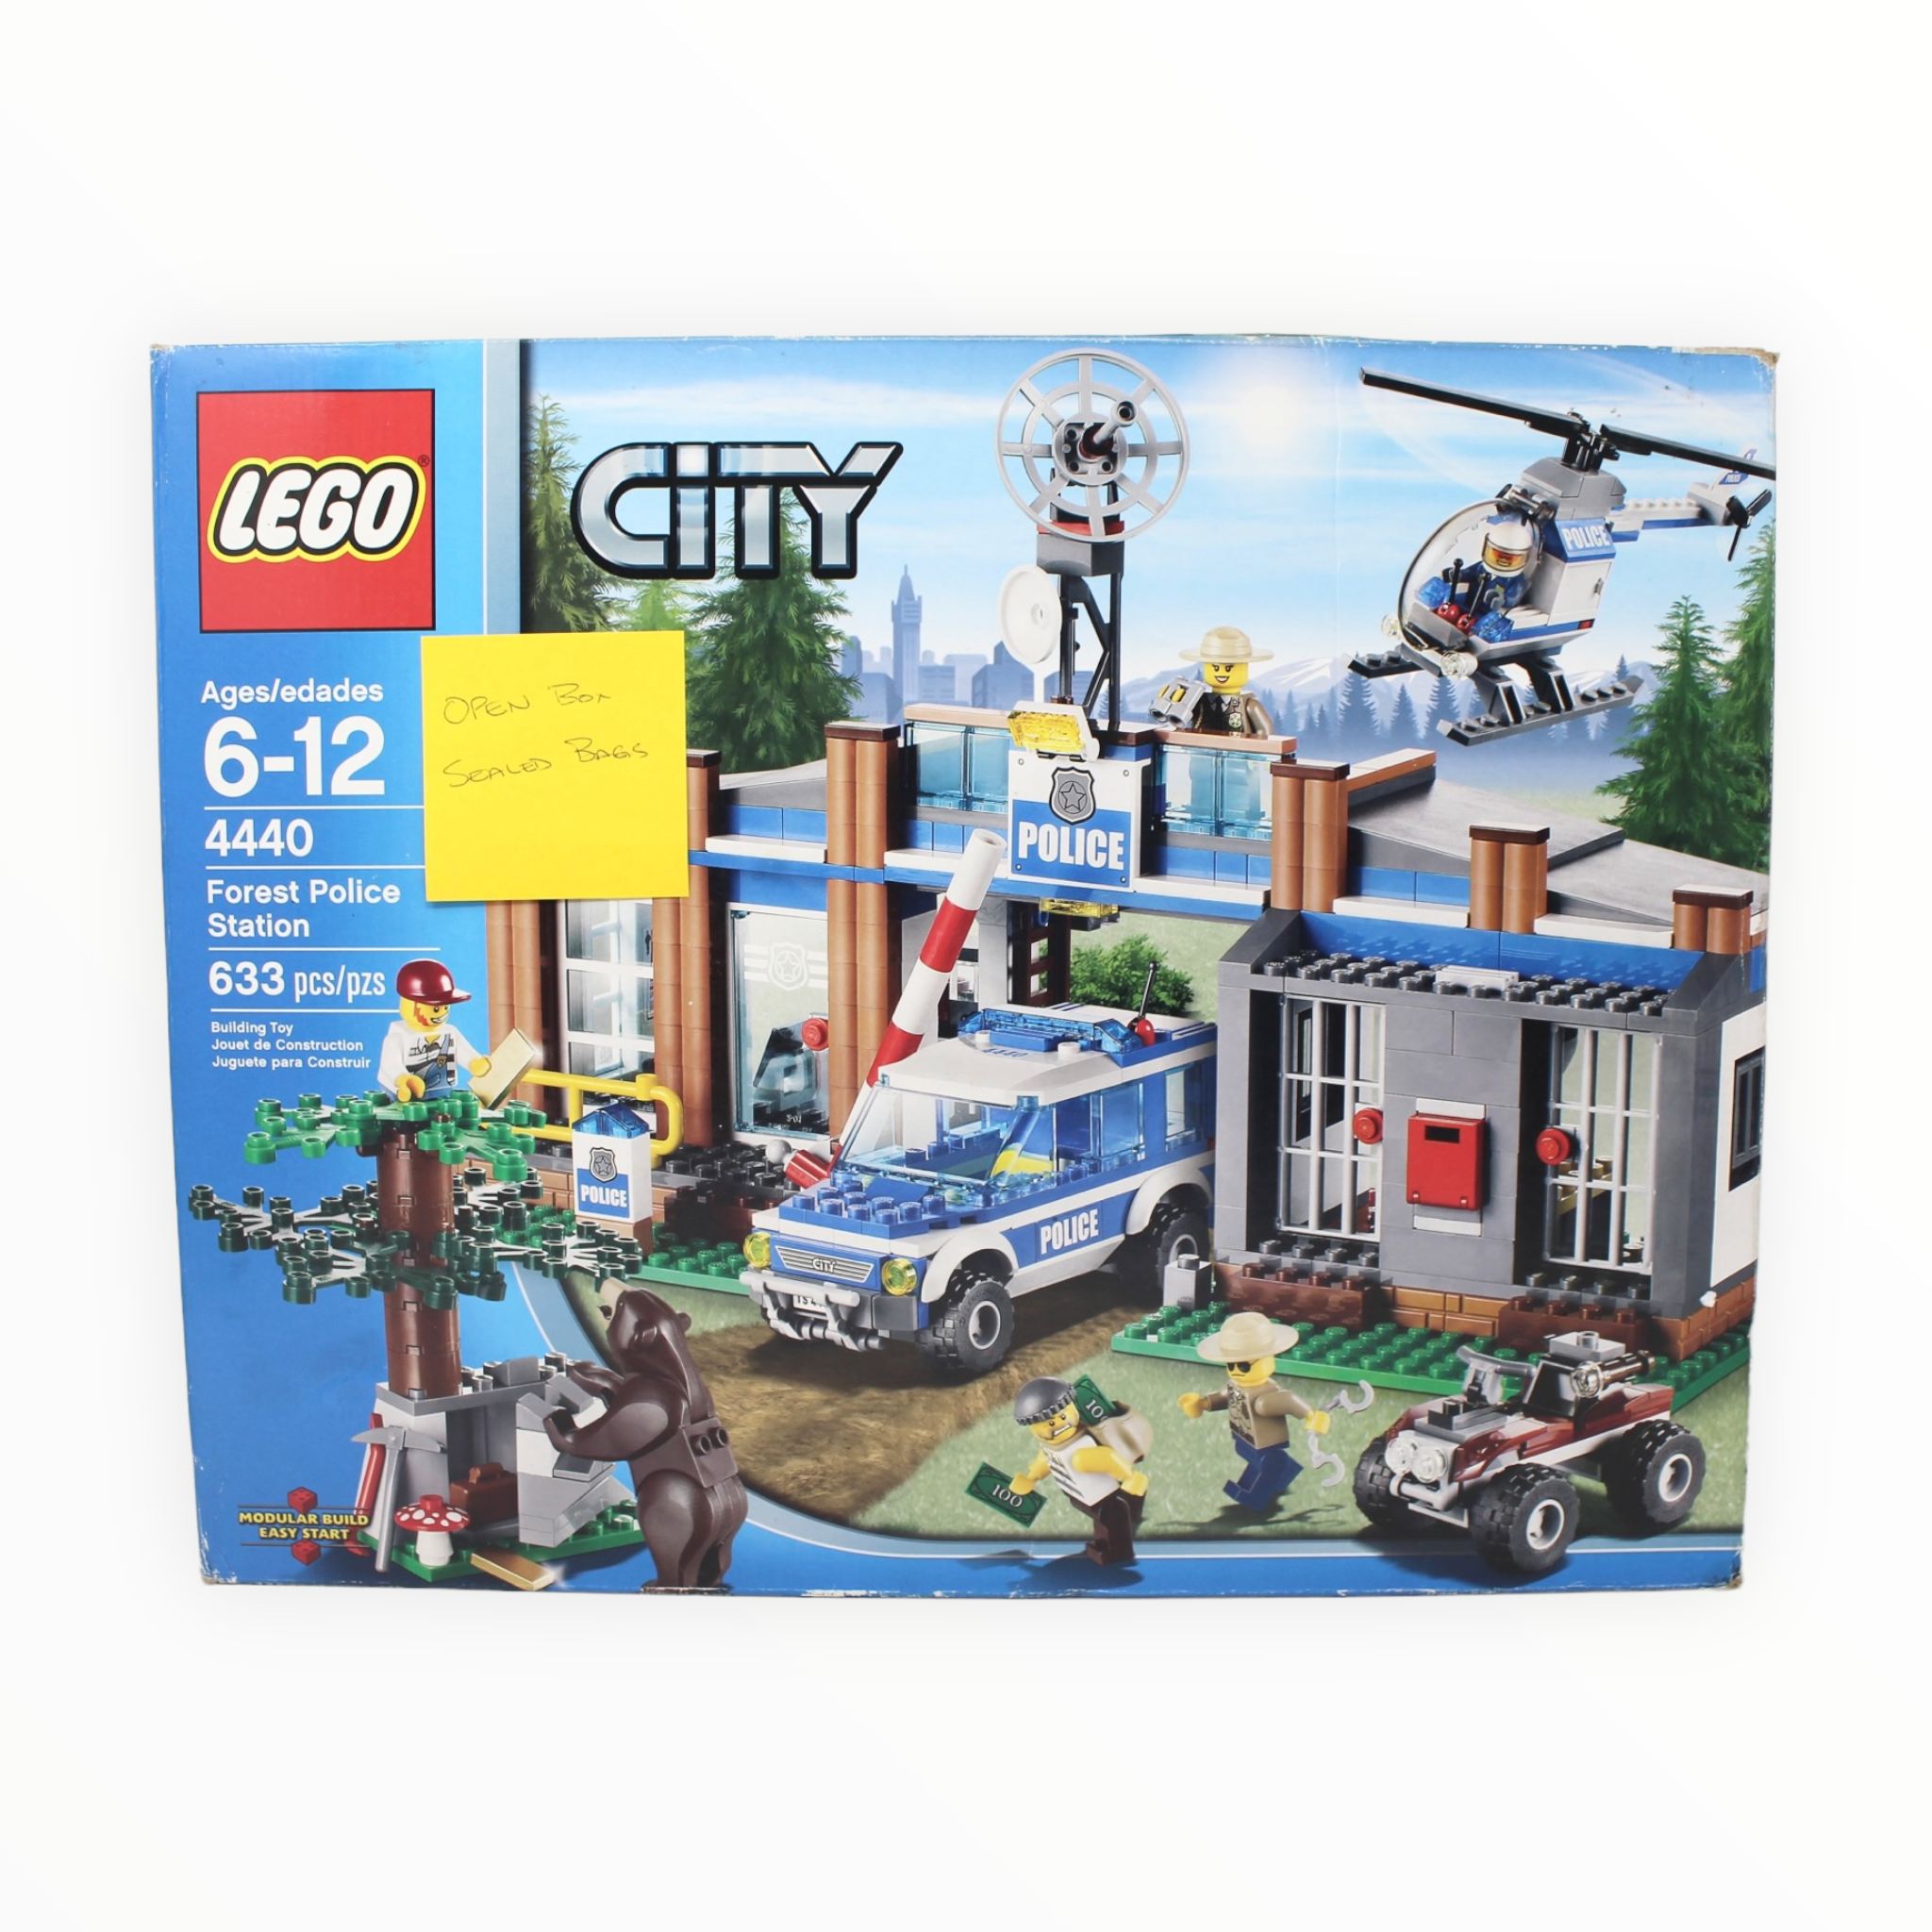 Certified Used Set 4440 City Forest Police Station (open box, sealed bags)